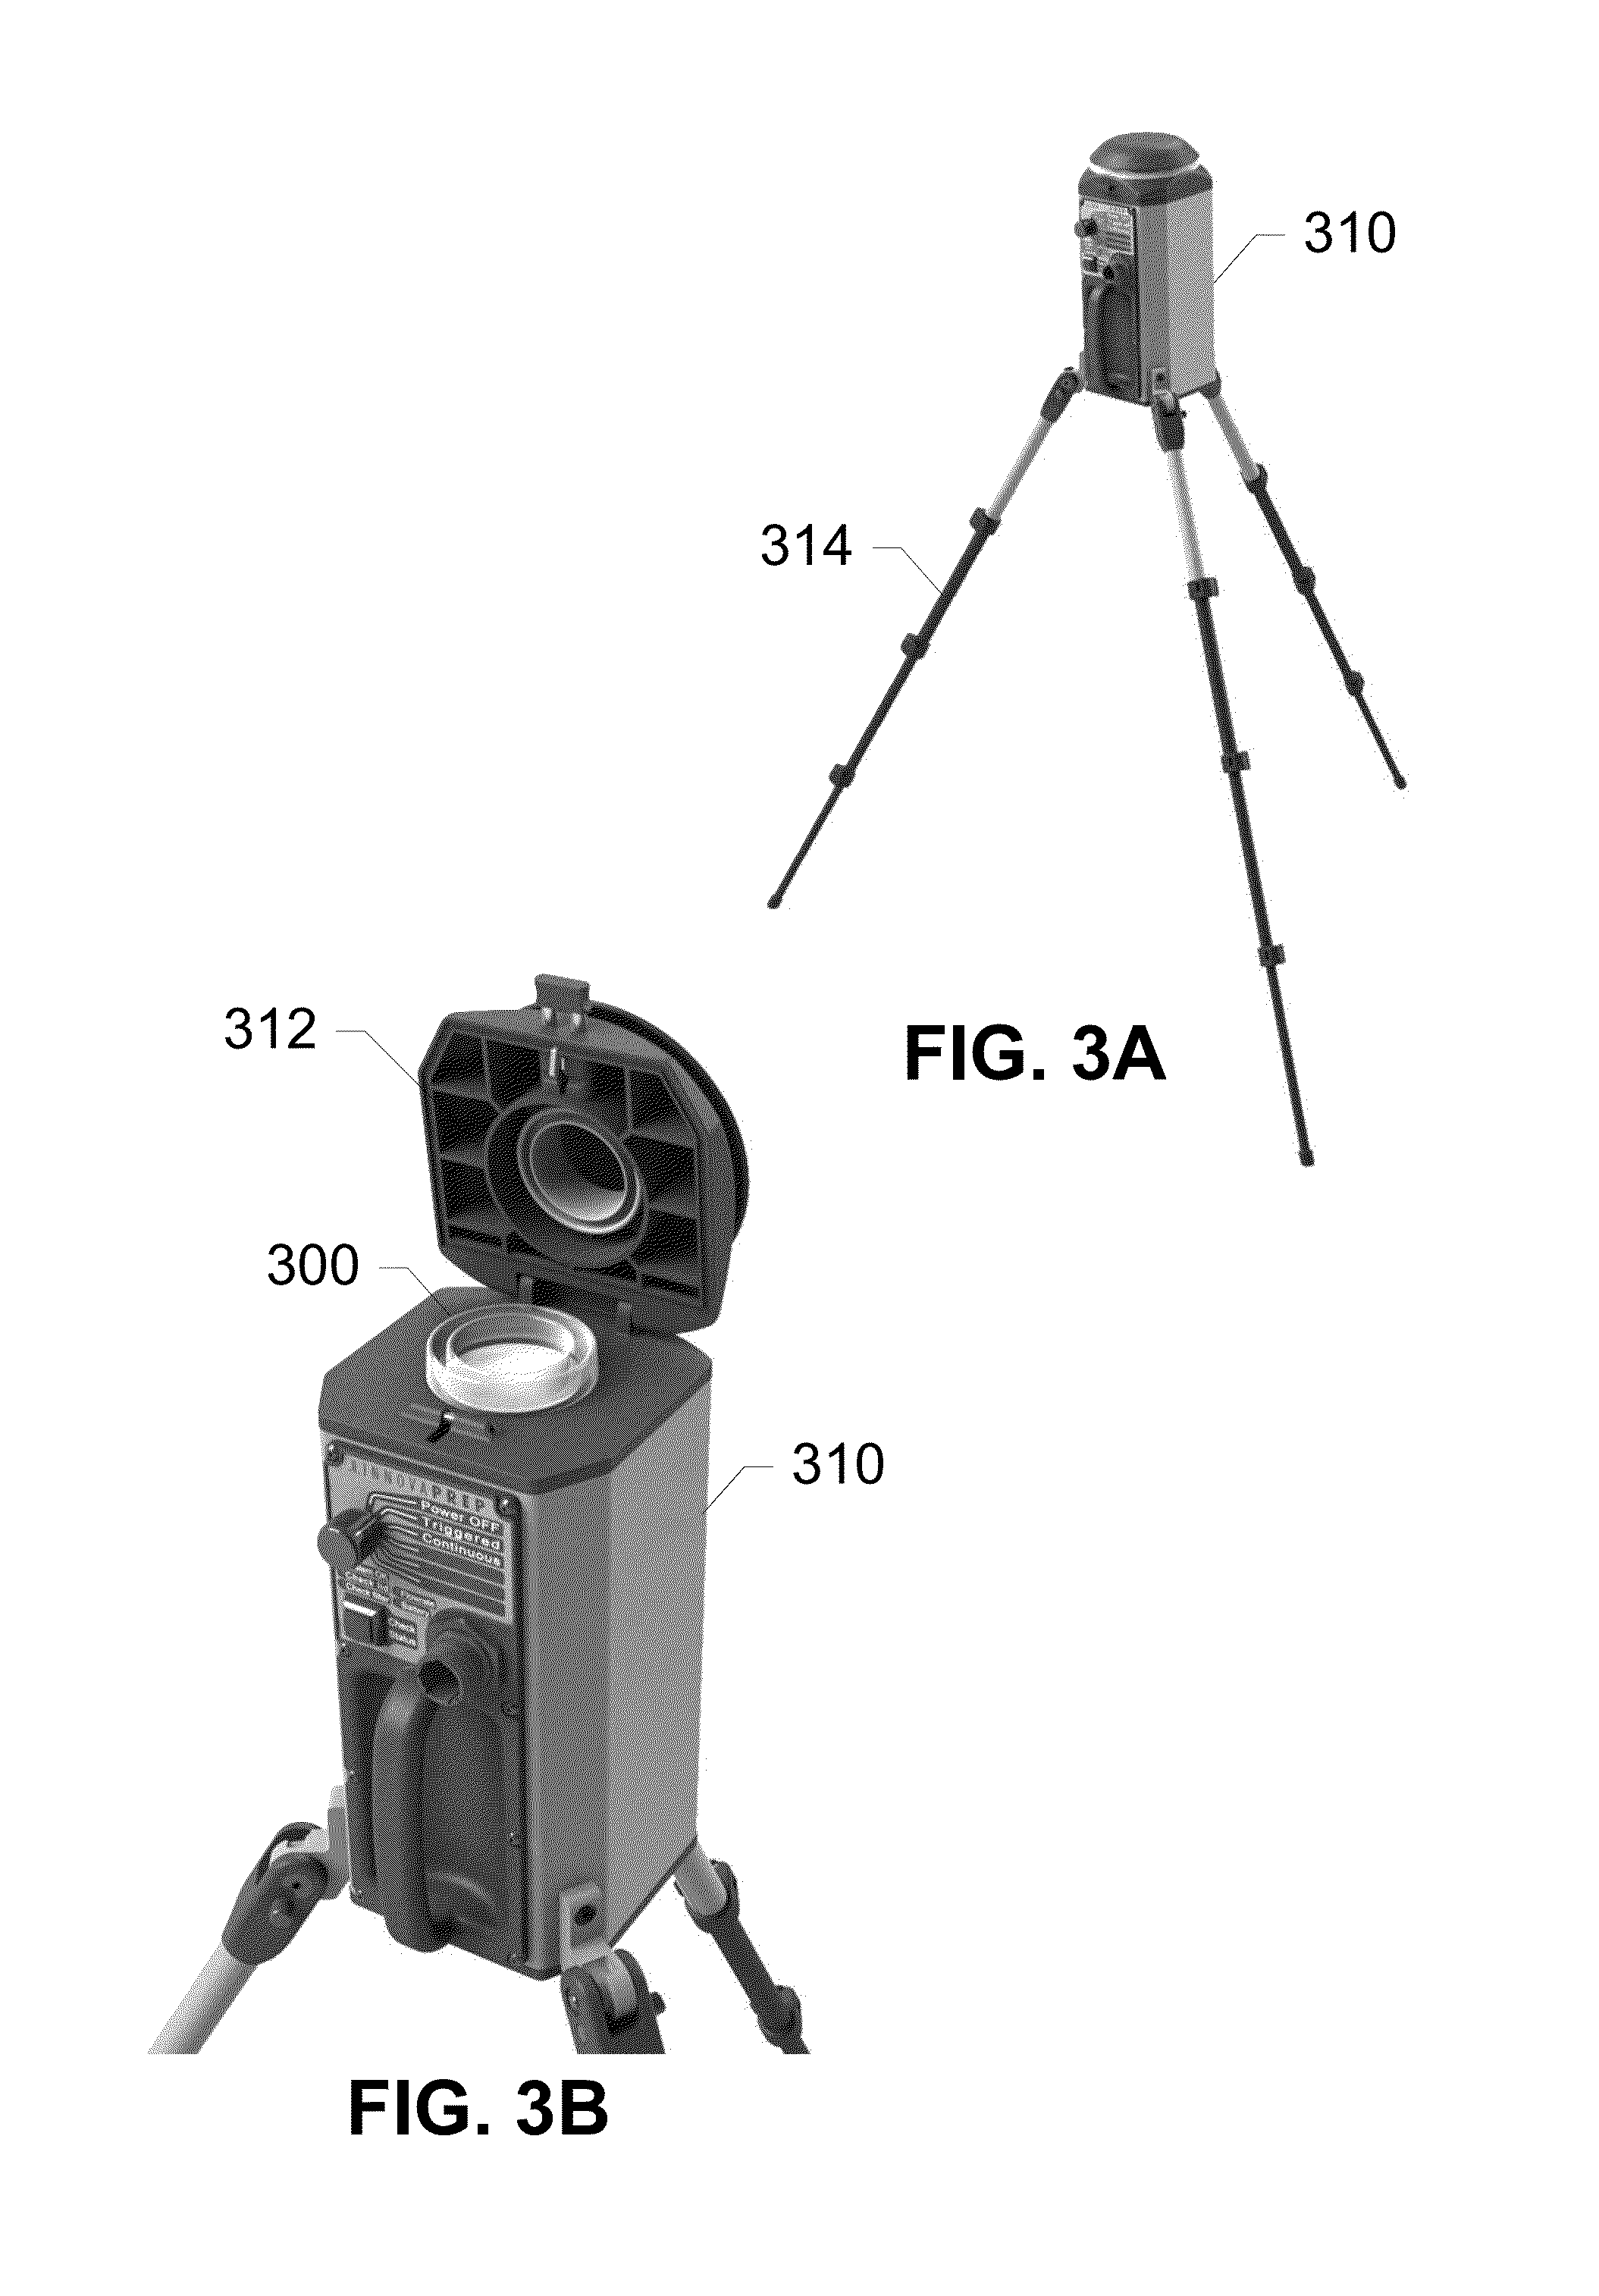 Devices, systems and methods for elution of particles from flat filters